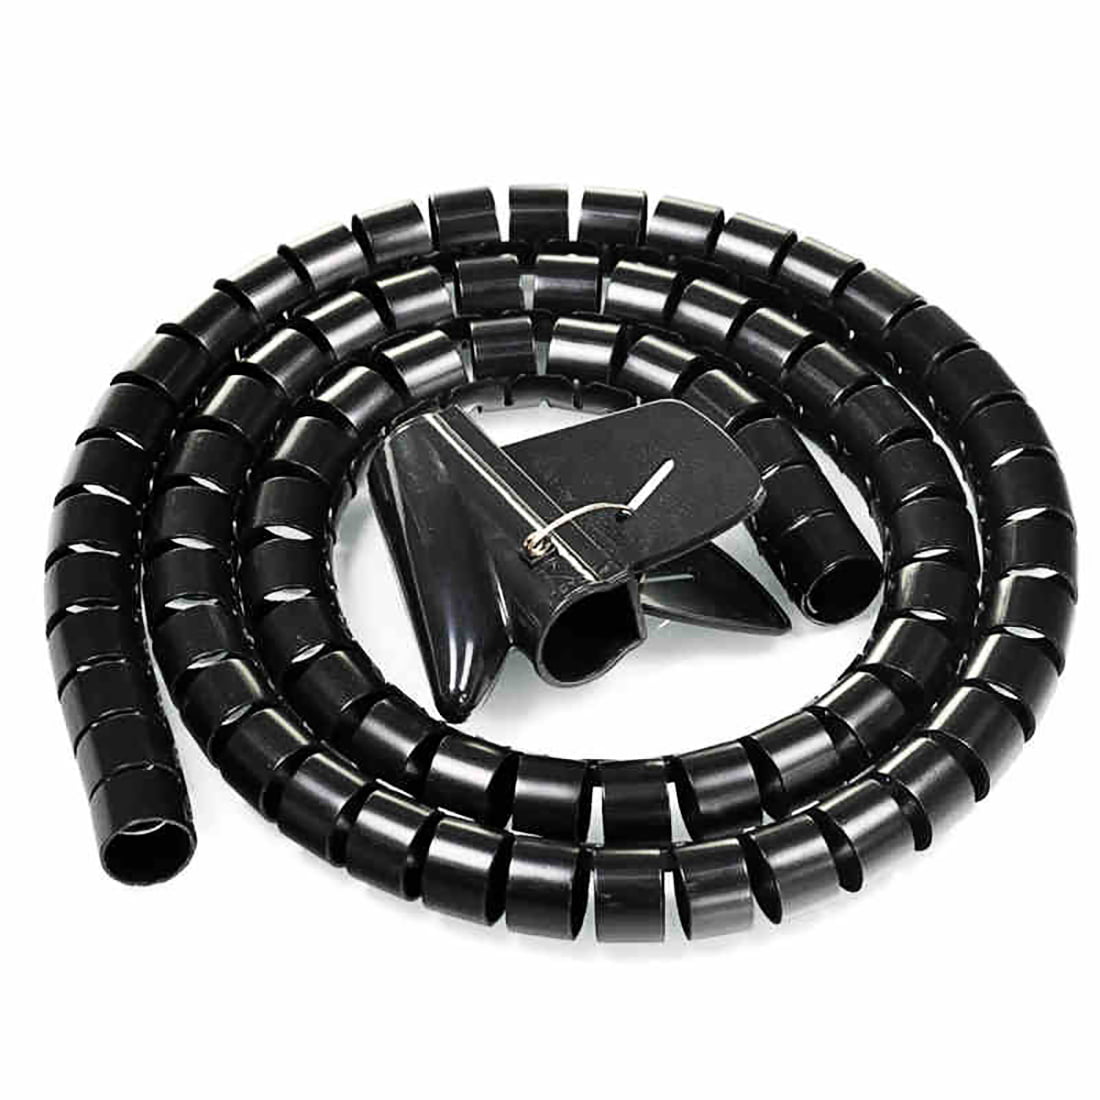 4.92Ft 1.2" 1.5M Spiral Cable Zip Wire Wrap Tube Computer Manage Cord Black 